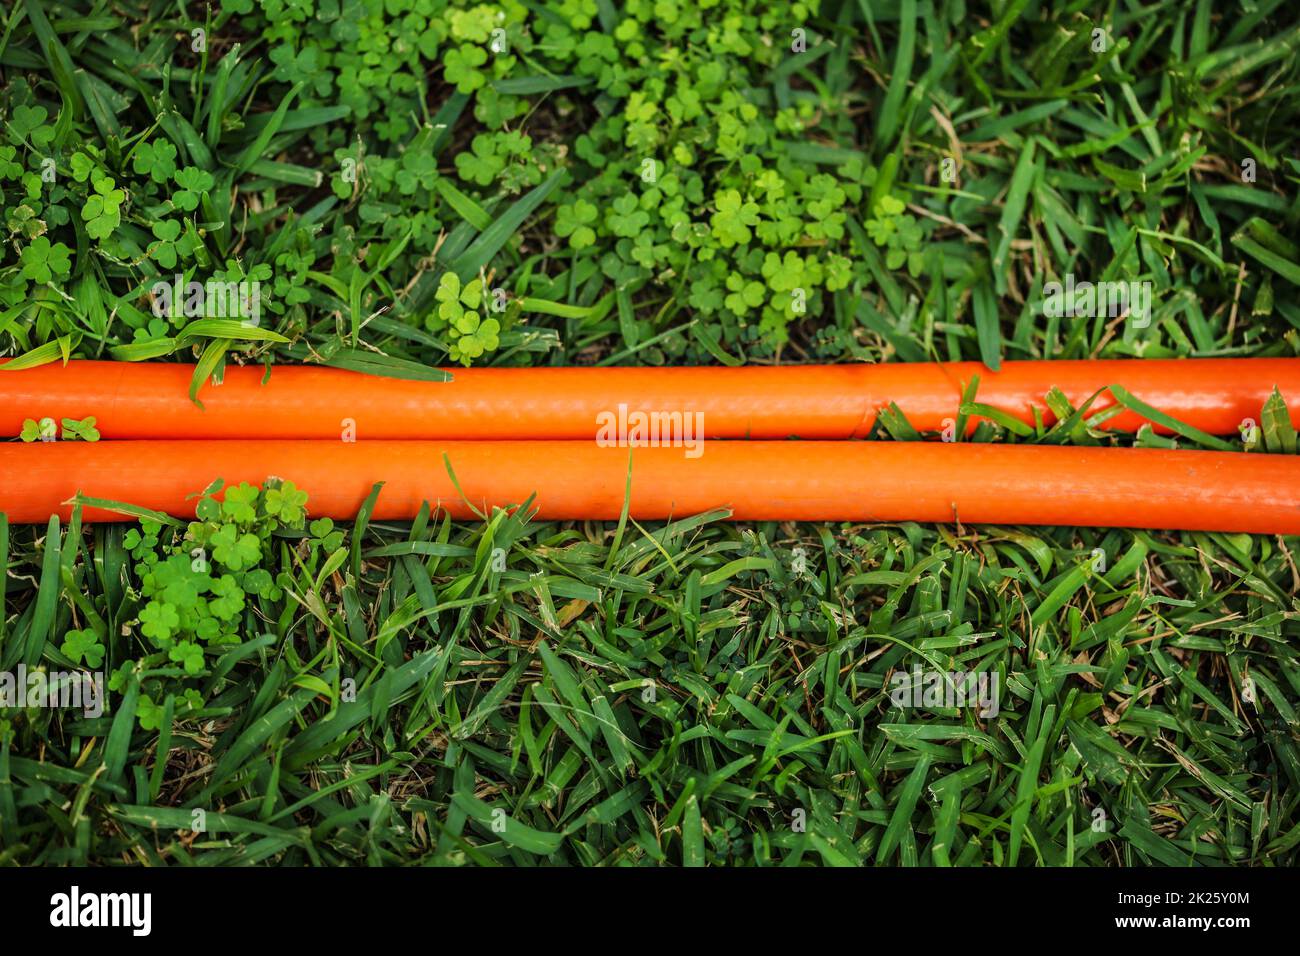 Bright orange hose (two lines) in green lawn. View from above. Abstract gardening background. Stock Photo